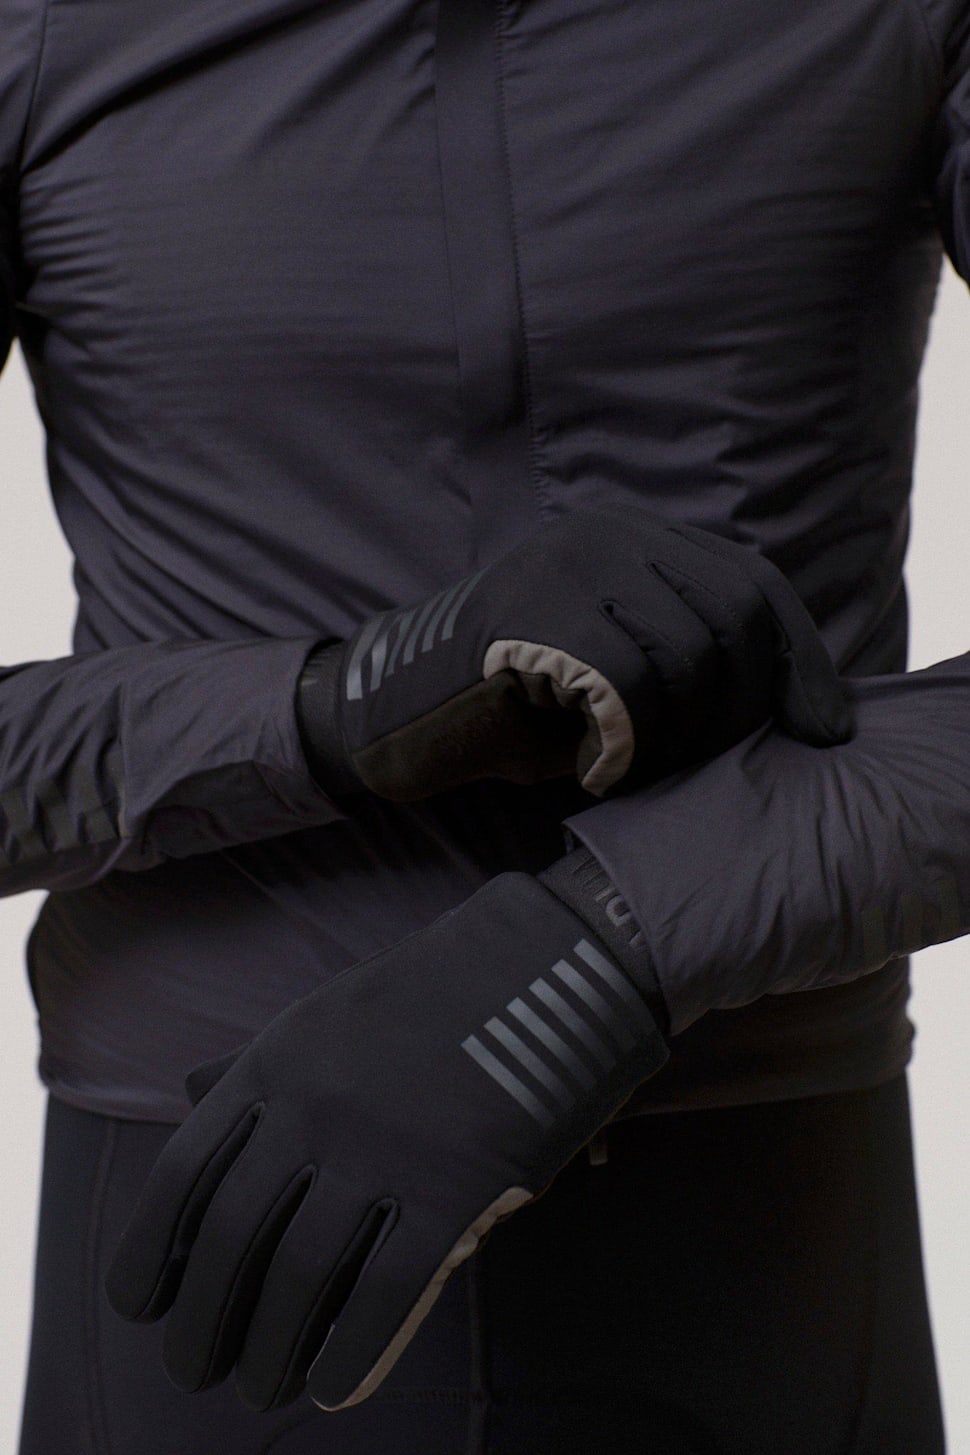 Pro Team Winter Gloves | Well Fitted Gloves Made For Racing In 